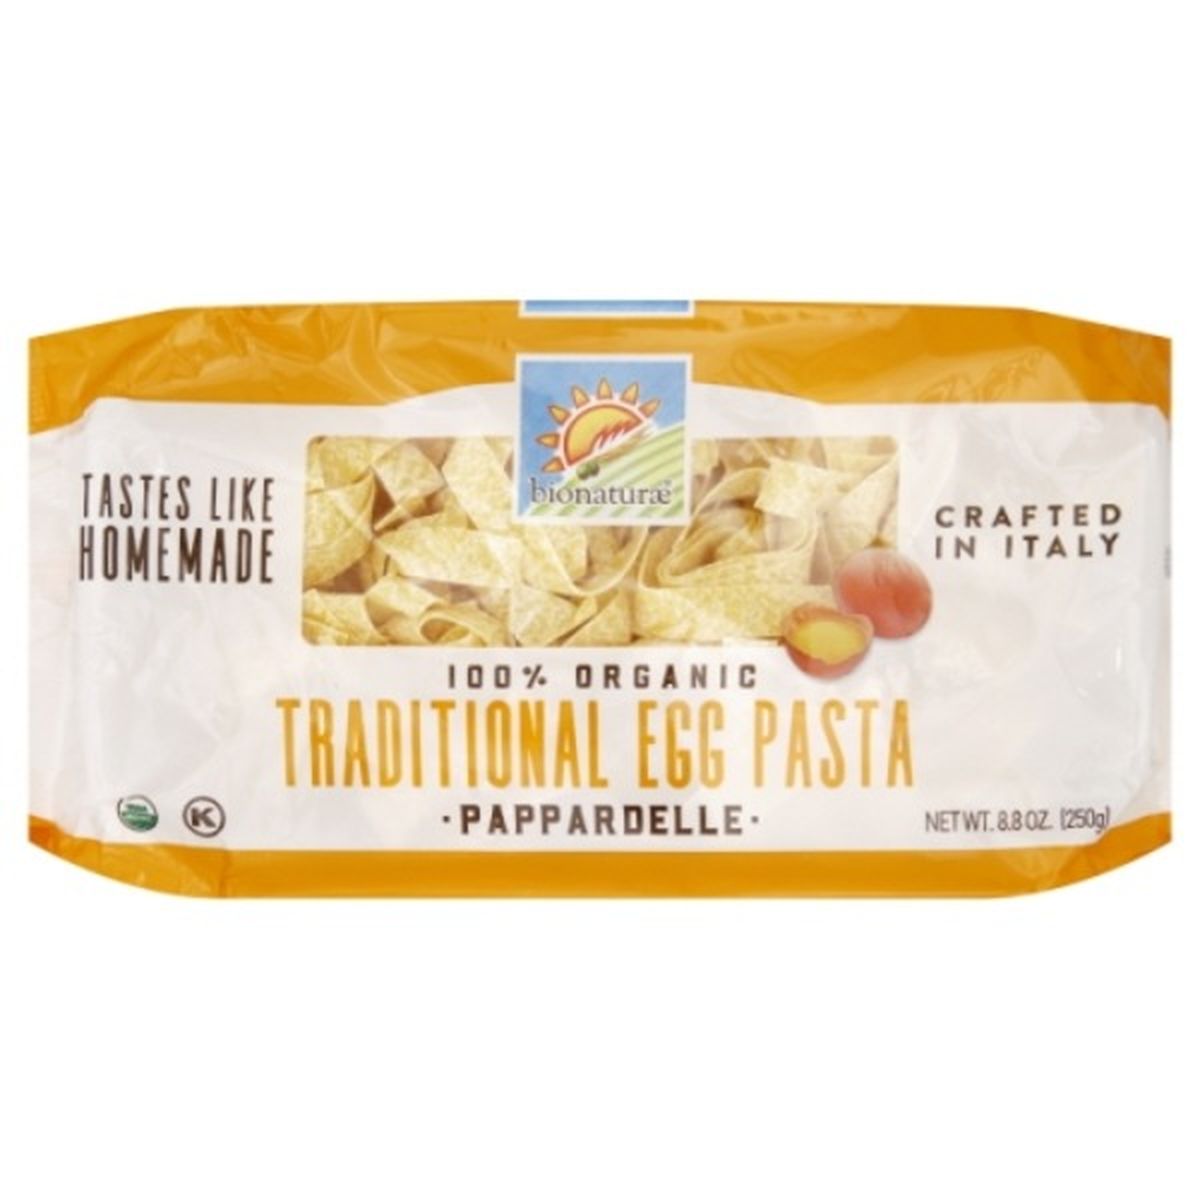 Calories in bionaturae Pappardelle, 100% Organic, Traditional Egg Pasta